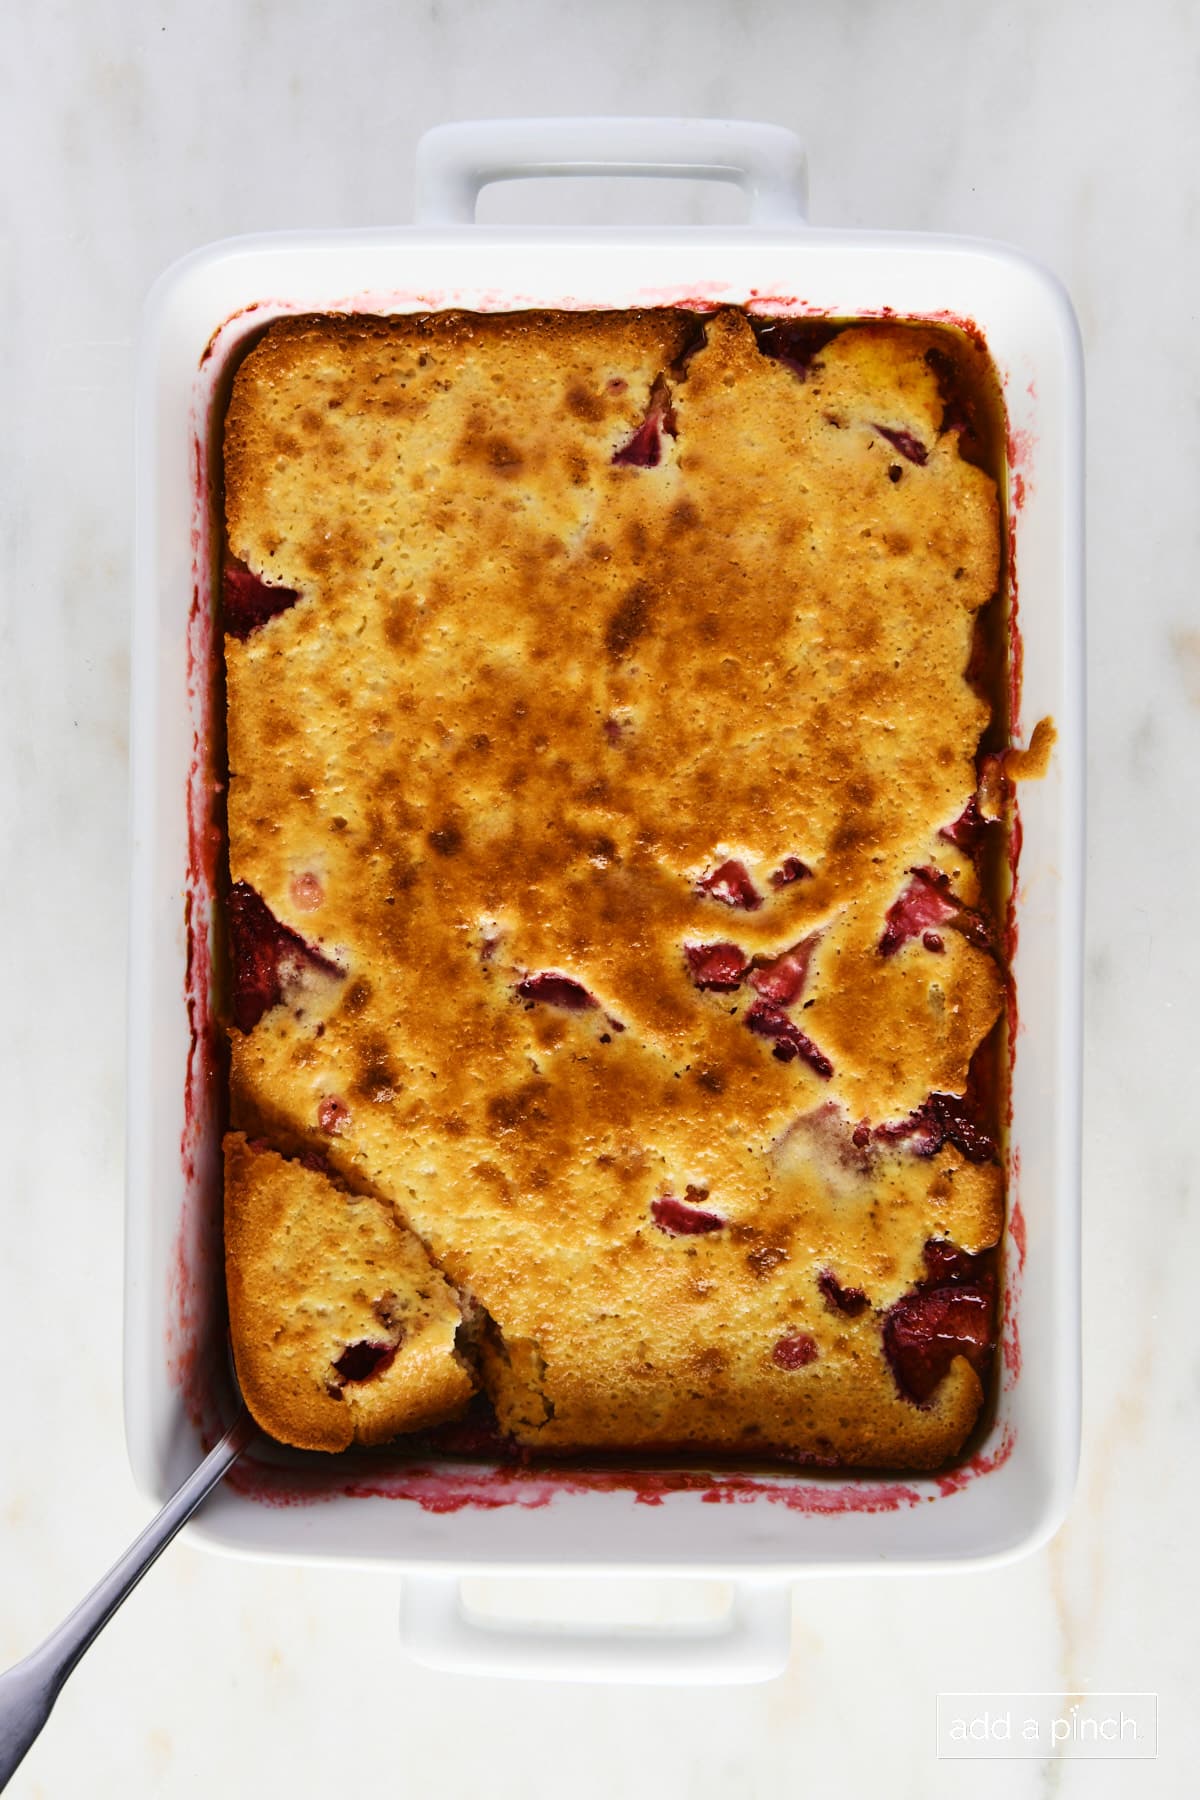 Strawberry cobbler in a white baking dish ready to be served